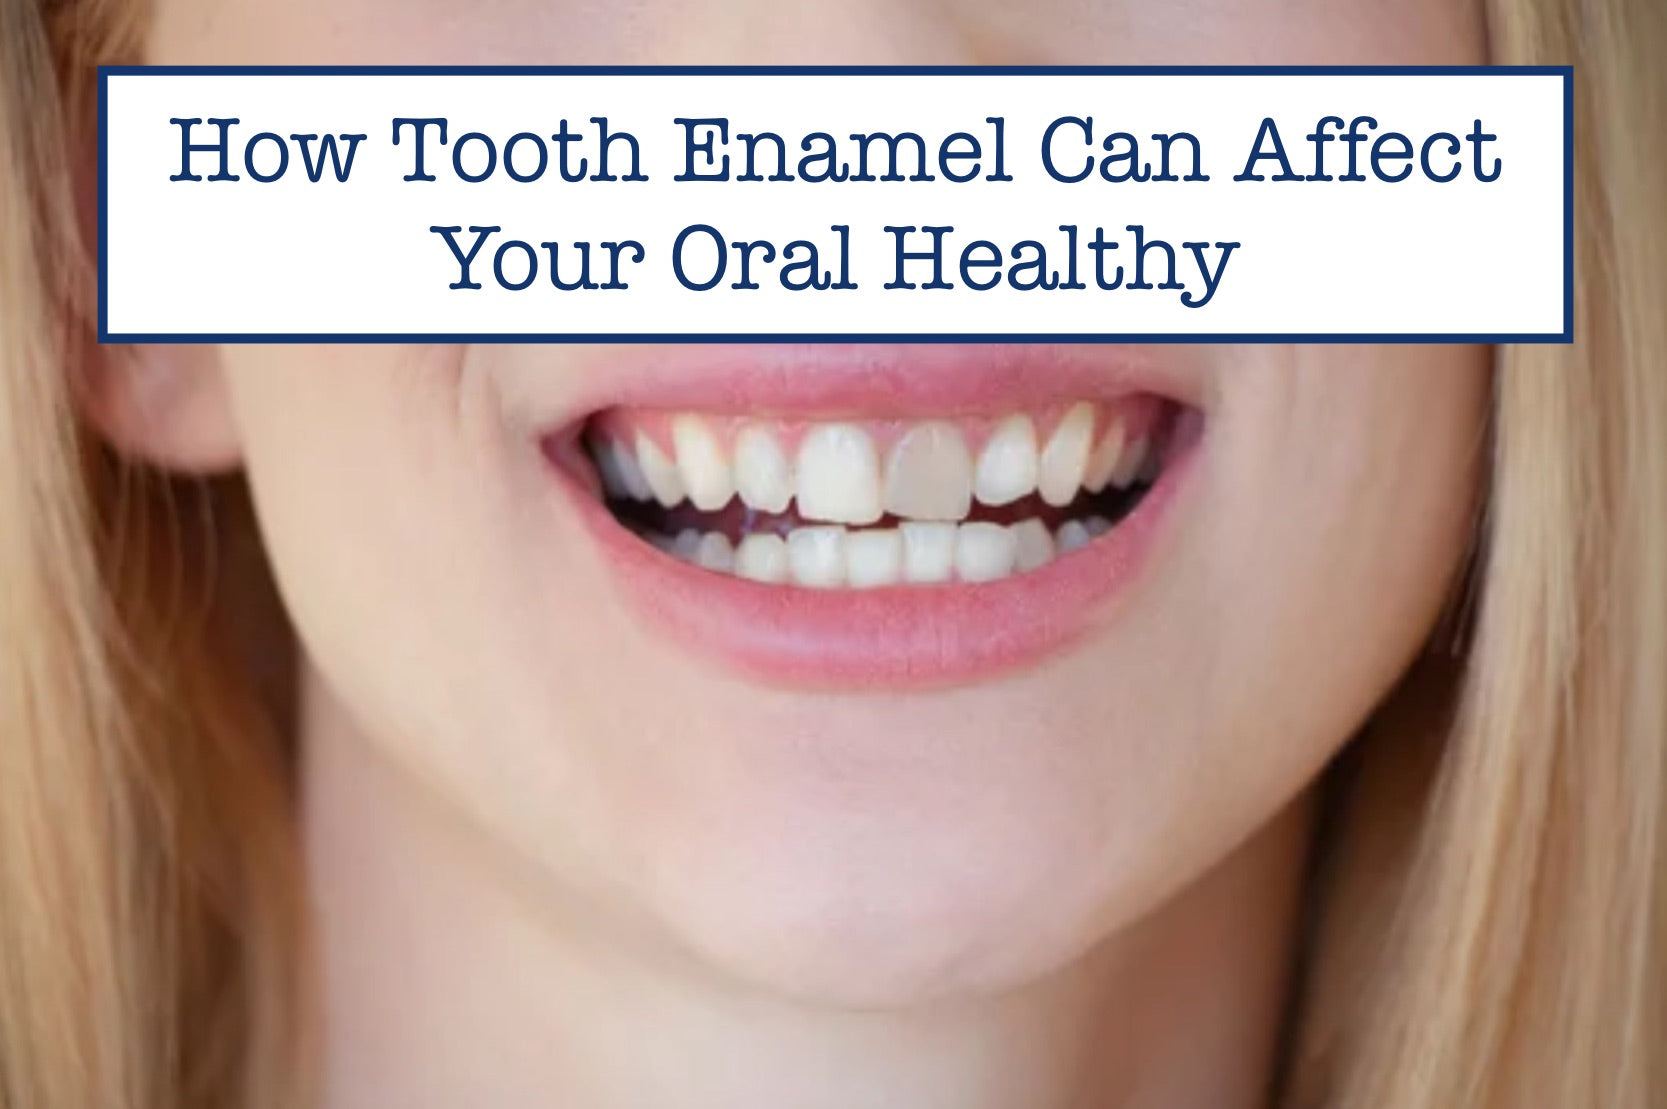 How Tooth Enamel Can Affect Your Oral Health